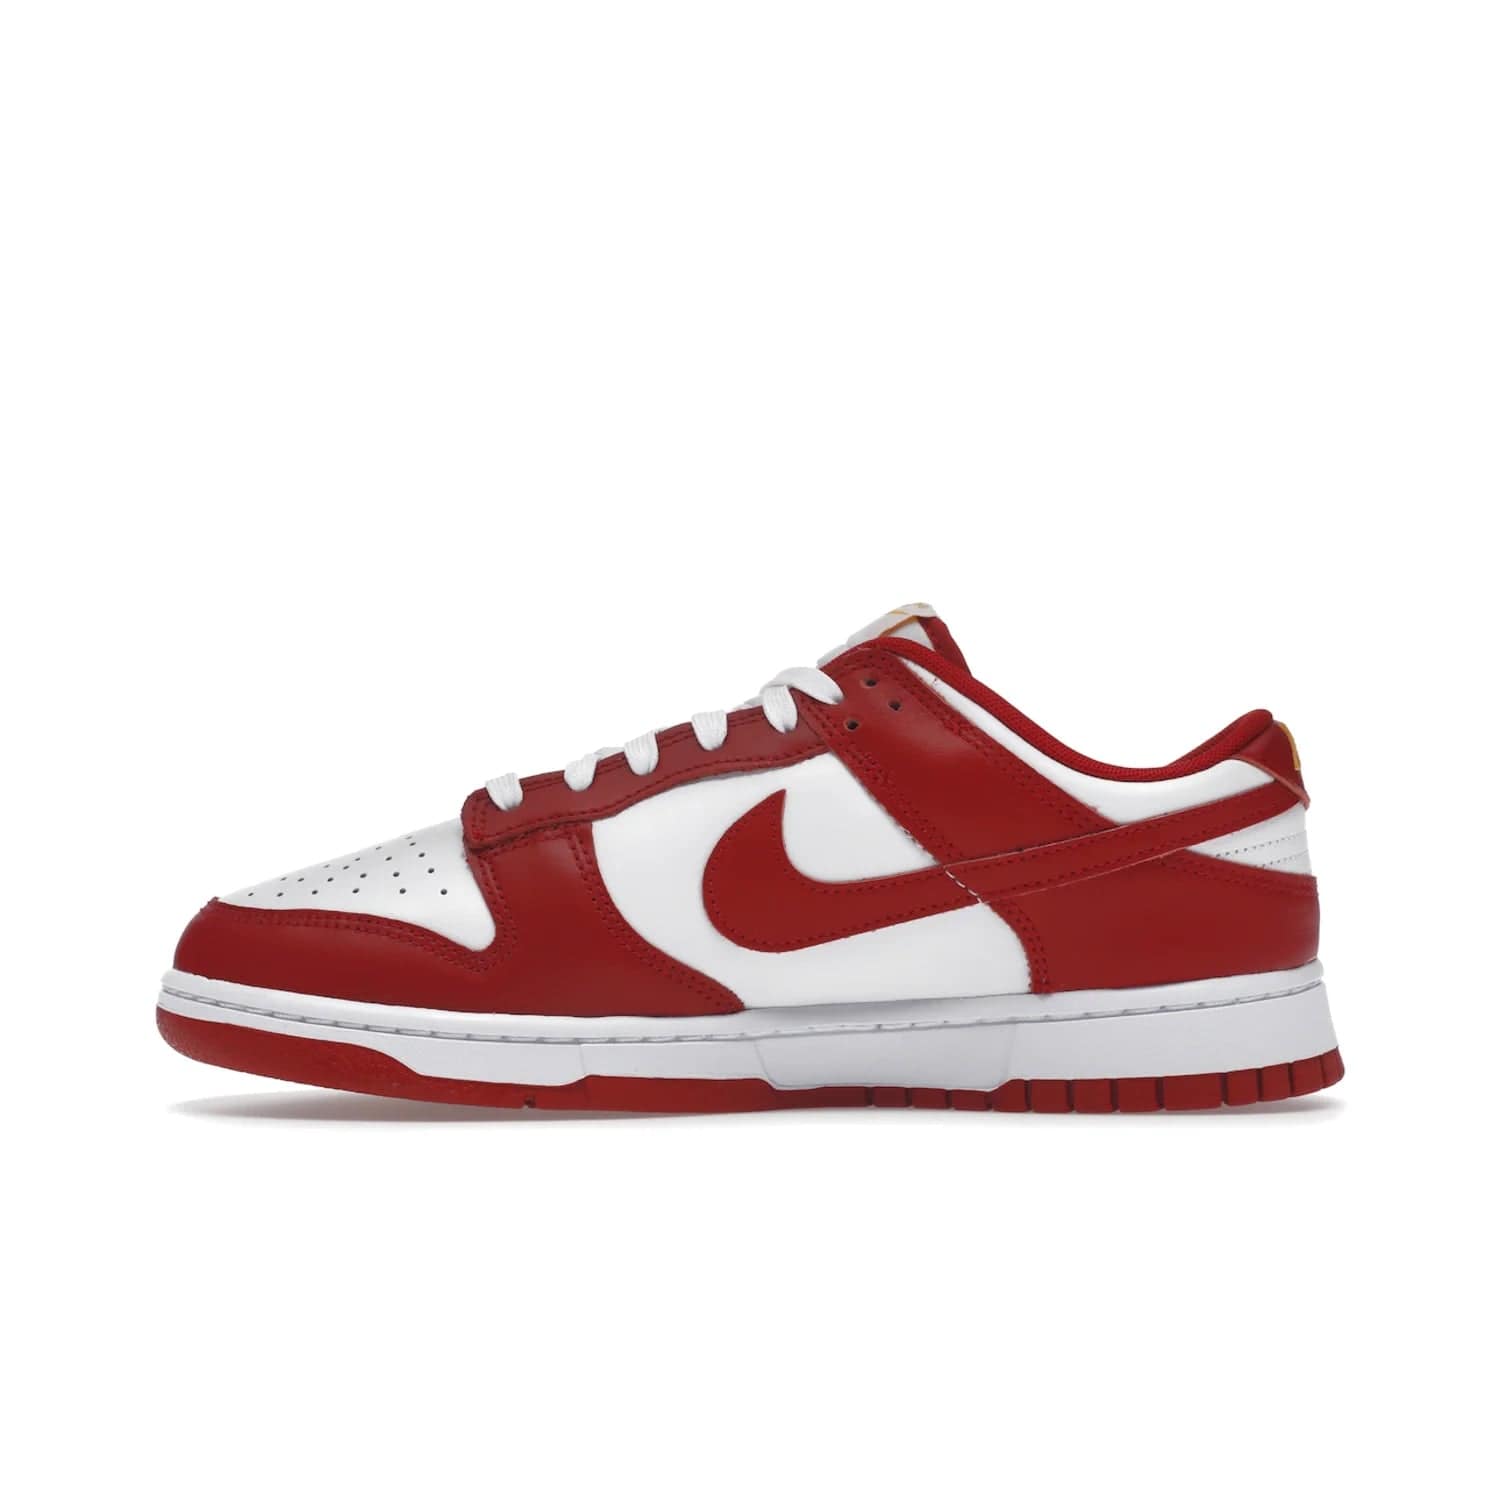 Nike Dunk Low USC - Image 19 - Only at www.BallersClubKickz.com - The Nike Dunk Low USC DD1391-602 colorway captures the eye of University of Southern California fans. Crafted with leather and rubber upper and outsole, this stylish sneaker features a white, gym red, and yellow colorway. With yellow Nike branding, white perforated vamp, and red suede Swoosh, this sneaker turns heads. Get the classic Nike Dunk Low USC releasing on November 9th, 2022.